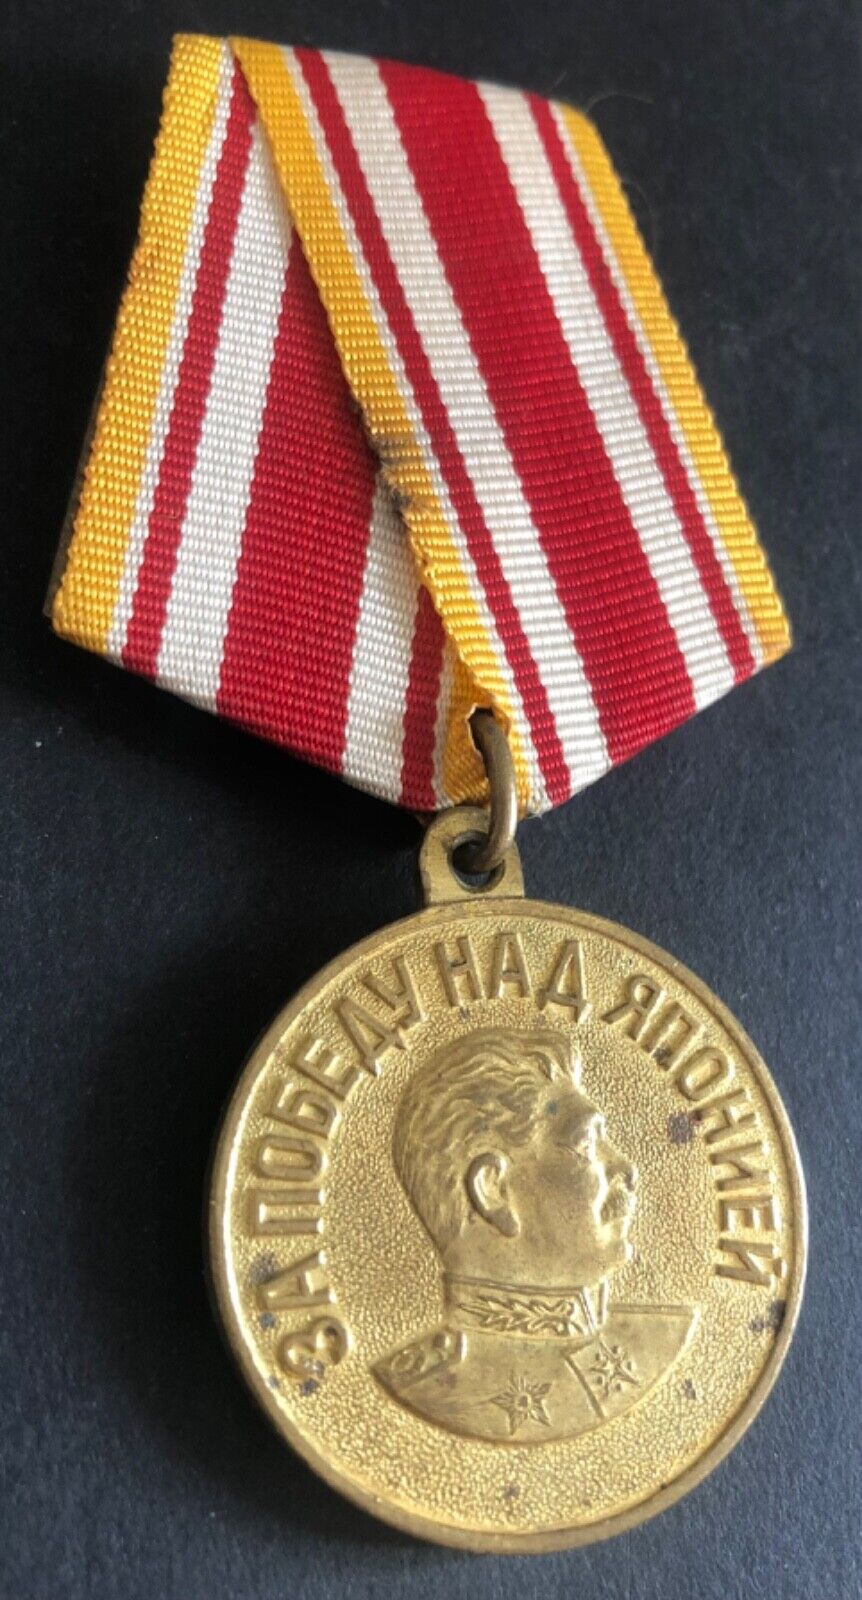 Ww2 Russian Soviet Medal Victory Over Japan ! 100% Original ! Pacific Campaign !